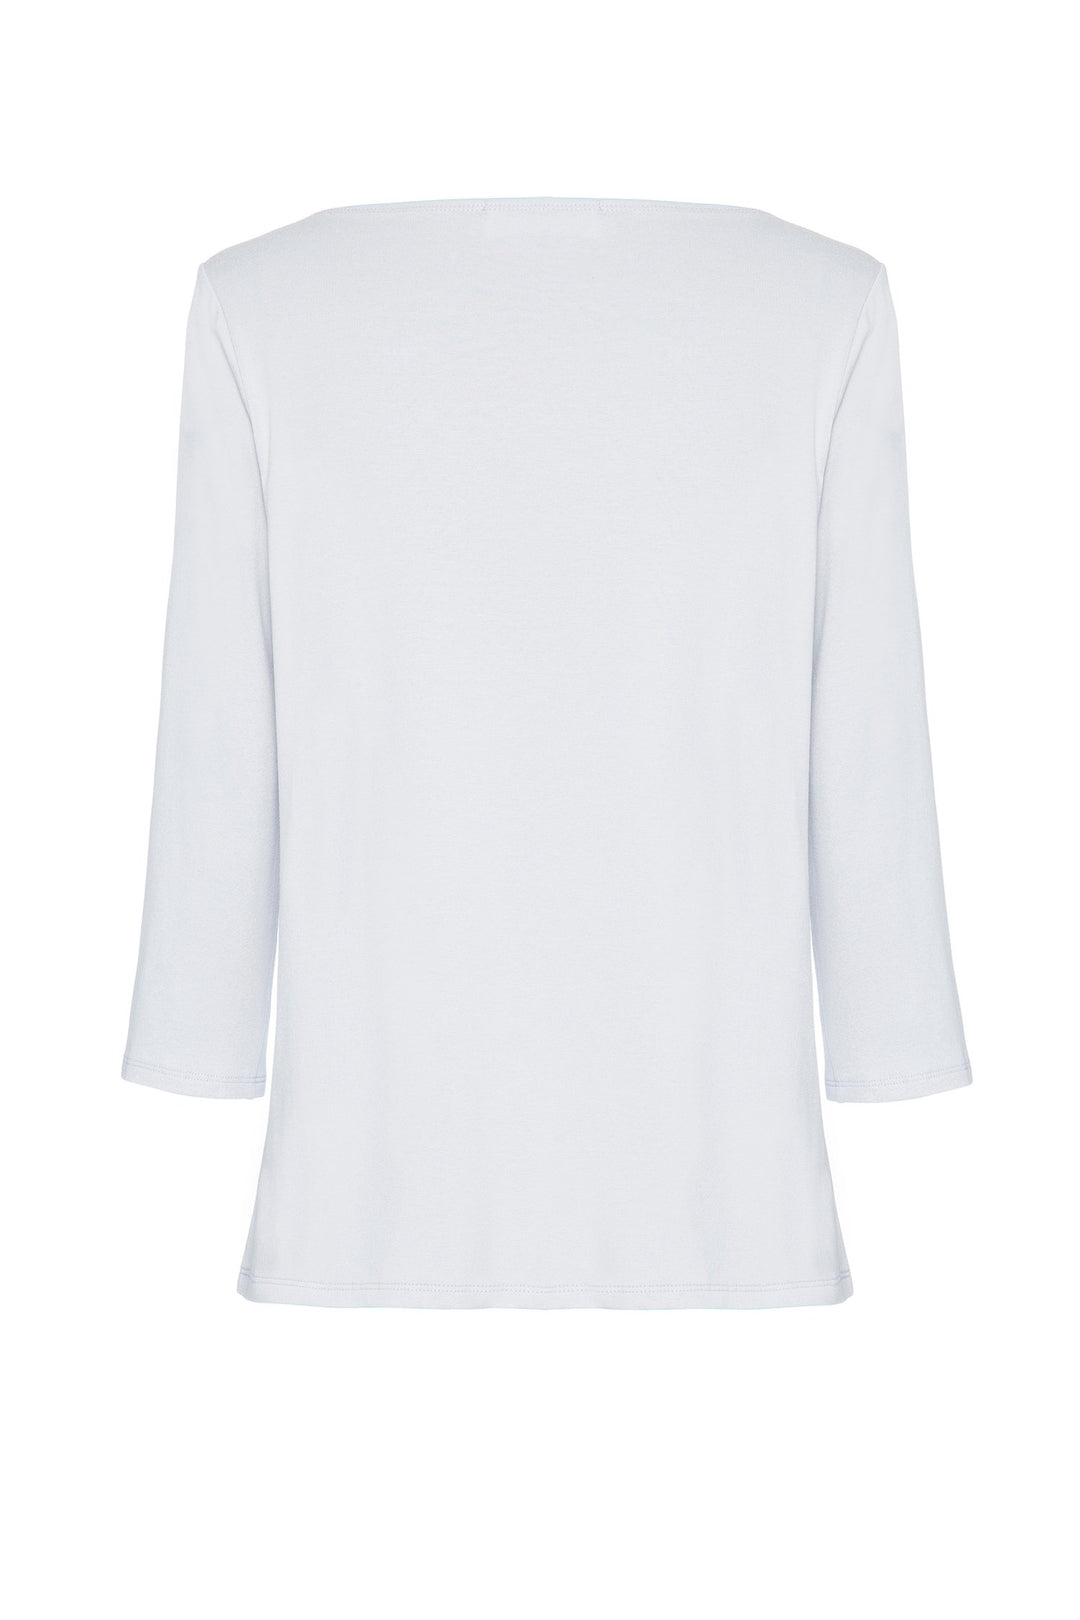 Relaxed Boat Neck Tops Mela Purdie 